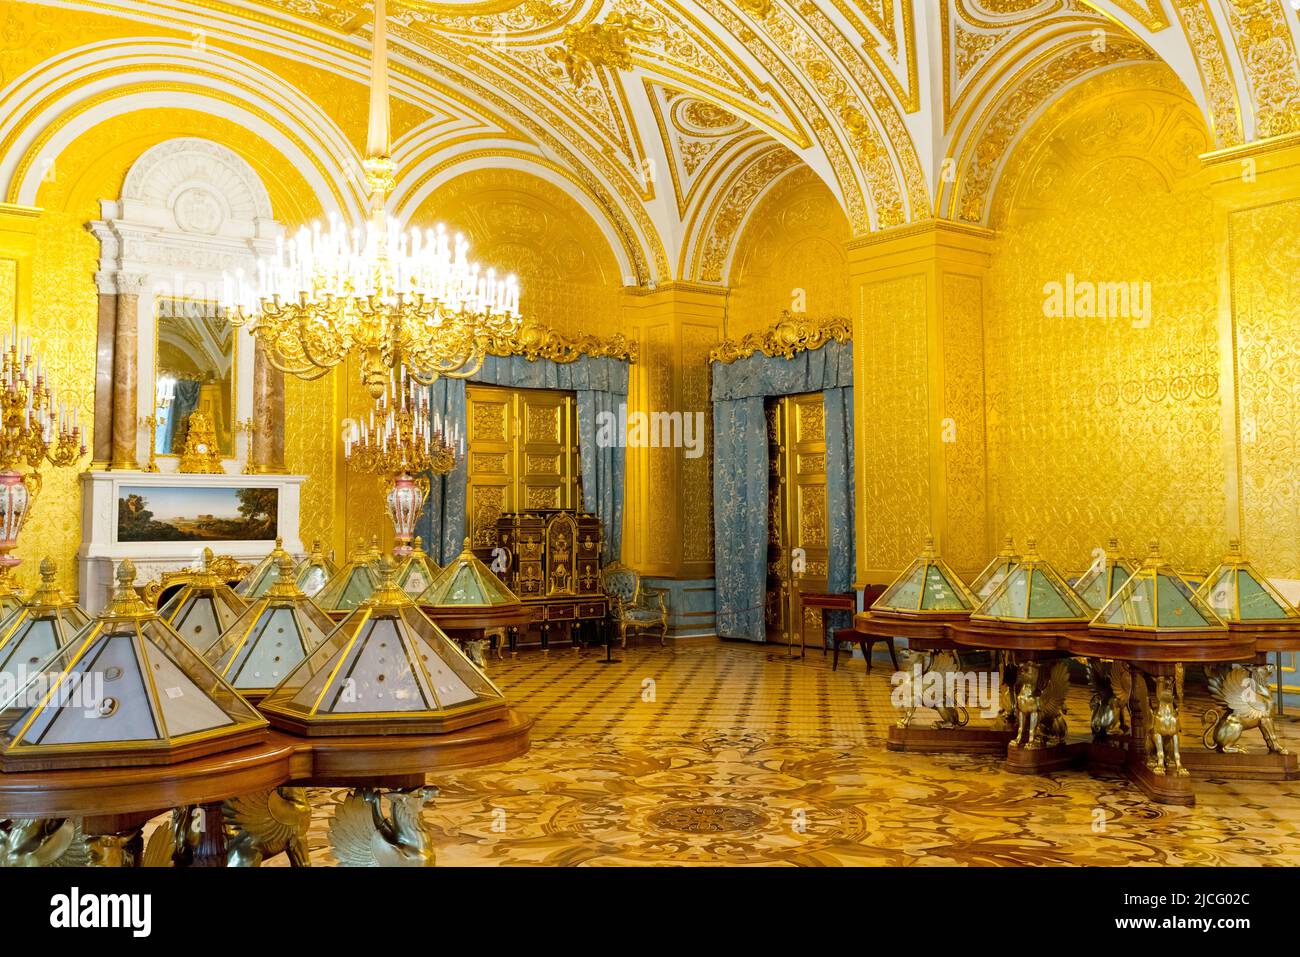 The Golden Drawing Room inside the Winter Palace, State Hermitage Museum, Saint Petersburg, Russia Stock Photo